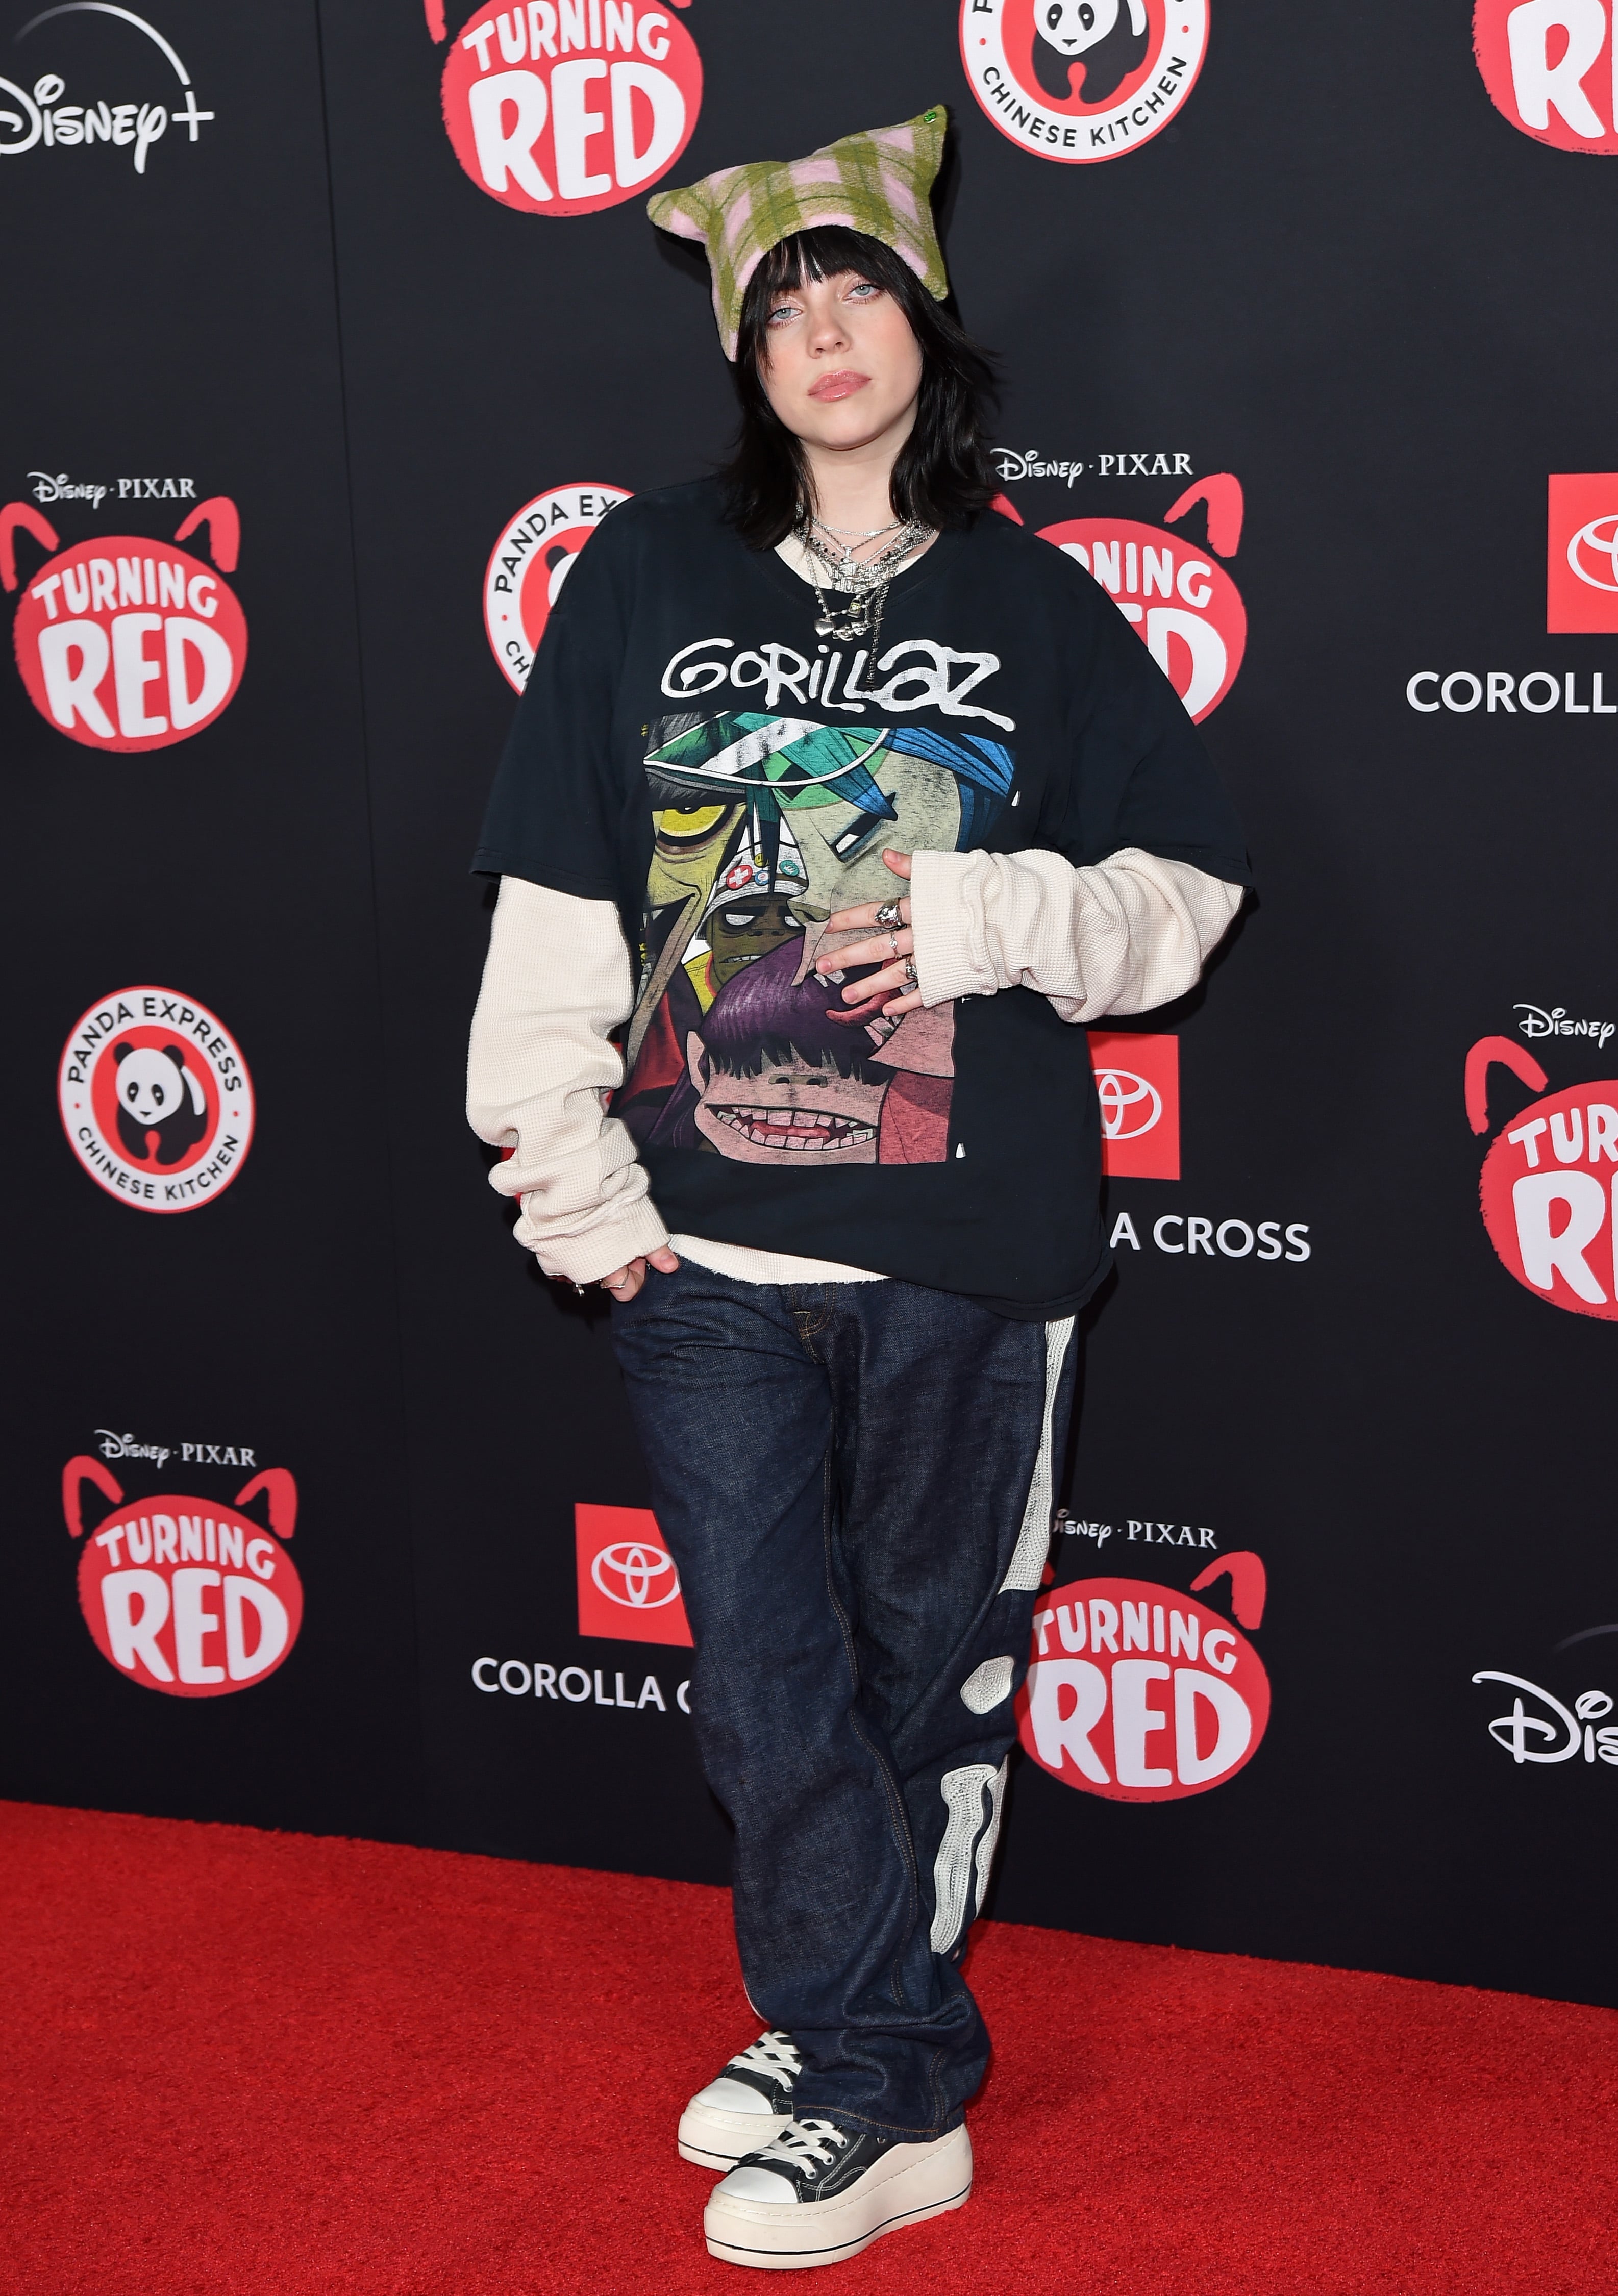 Billie Eilish's Best Red Carpet and Stage Fashion Looks